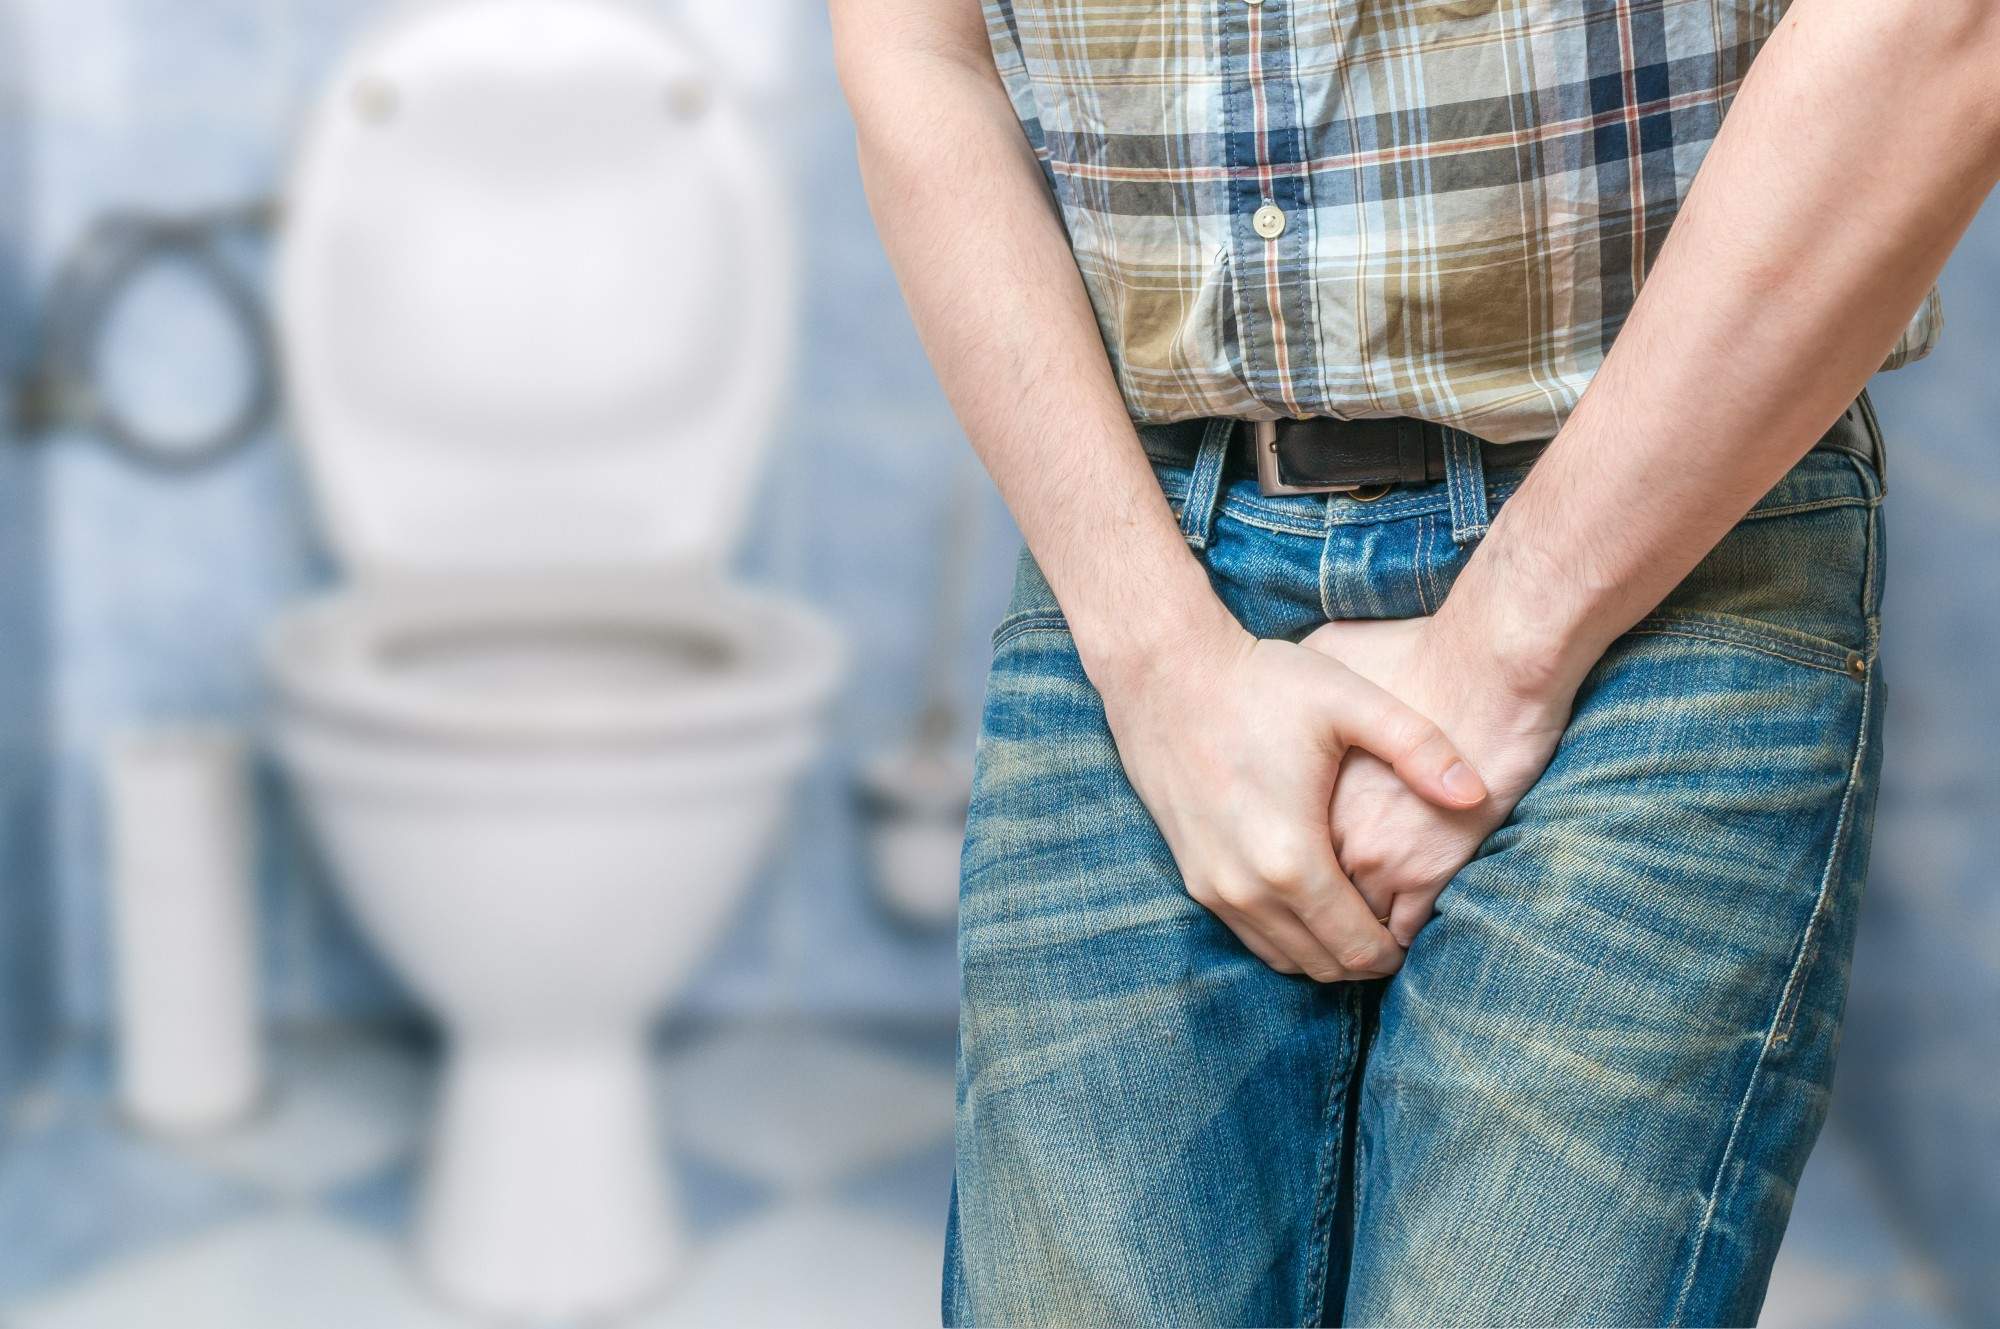 How Can You Have a Healthy Bladder?